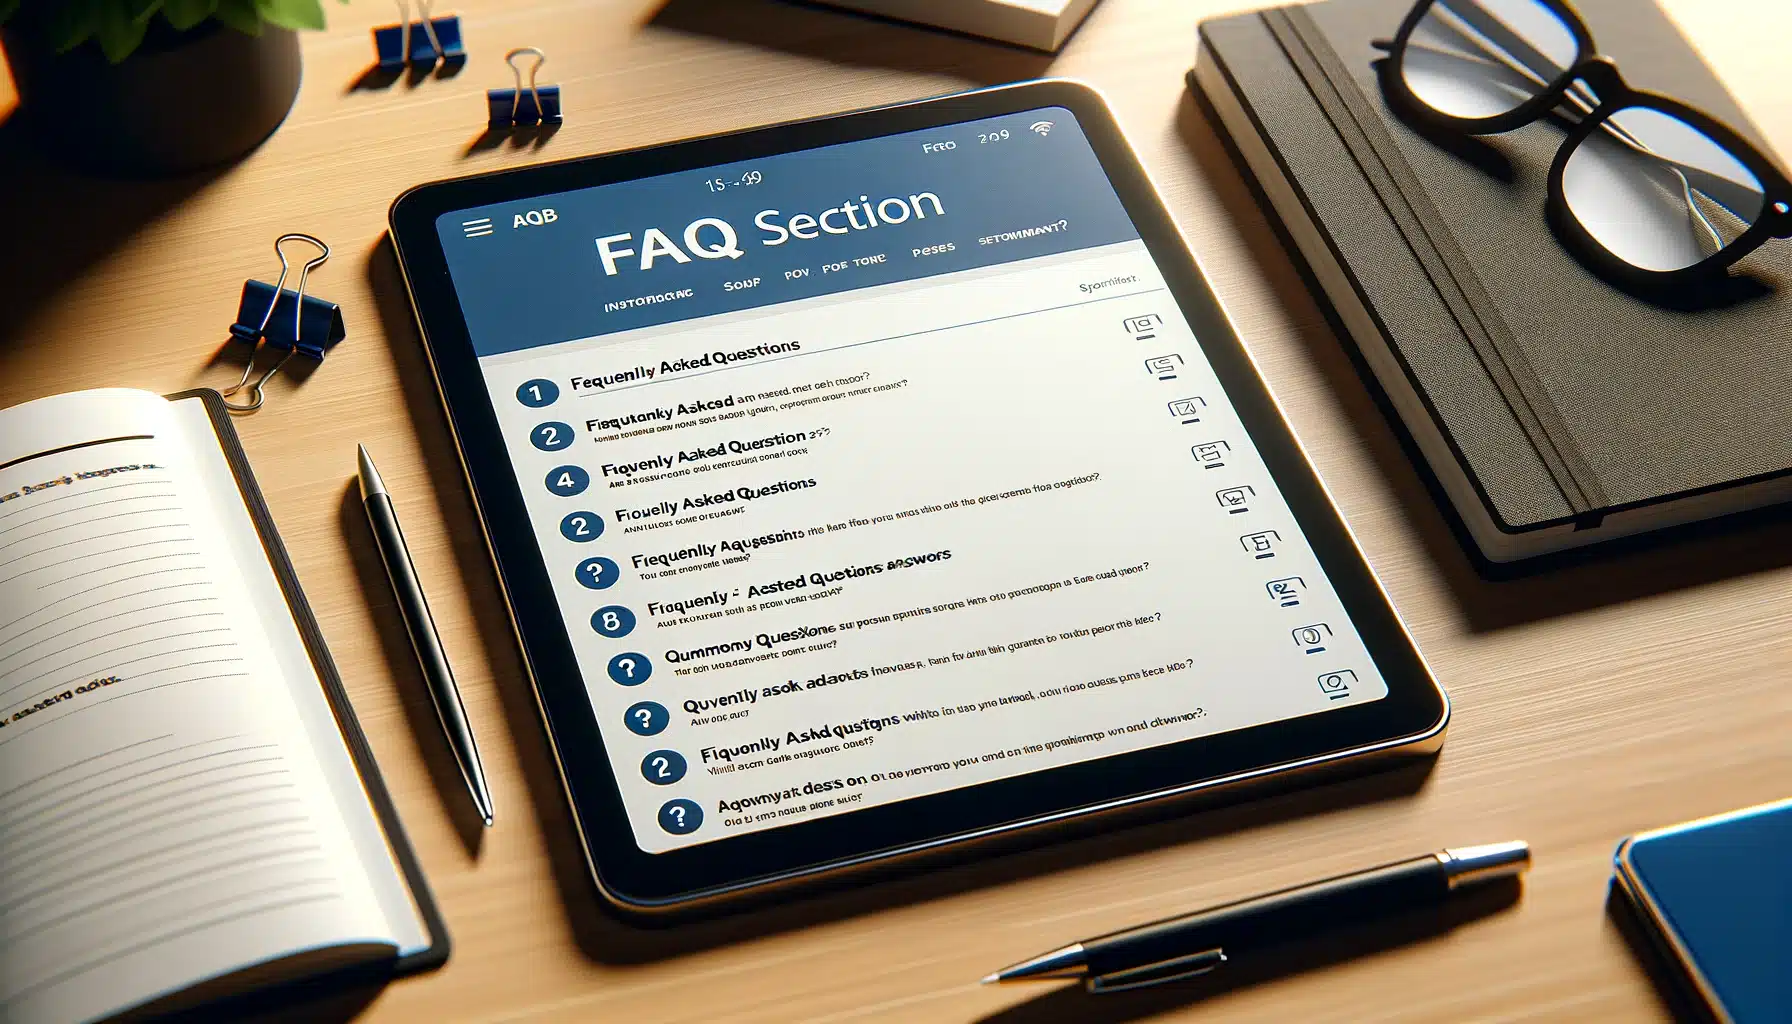 Digital tablet on a desk displaying an FAQ section, surrounded by office items.